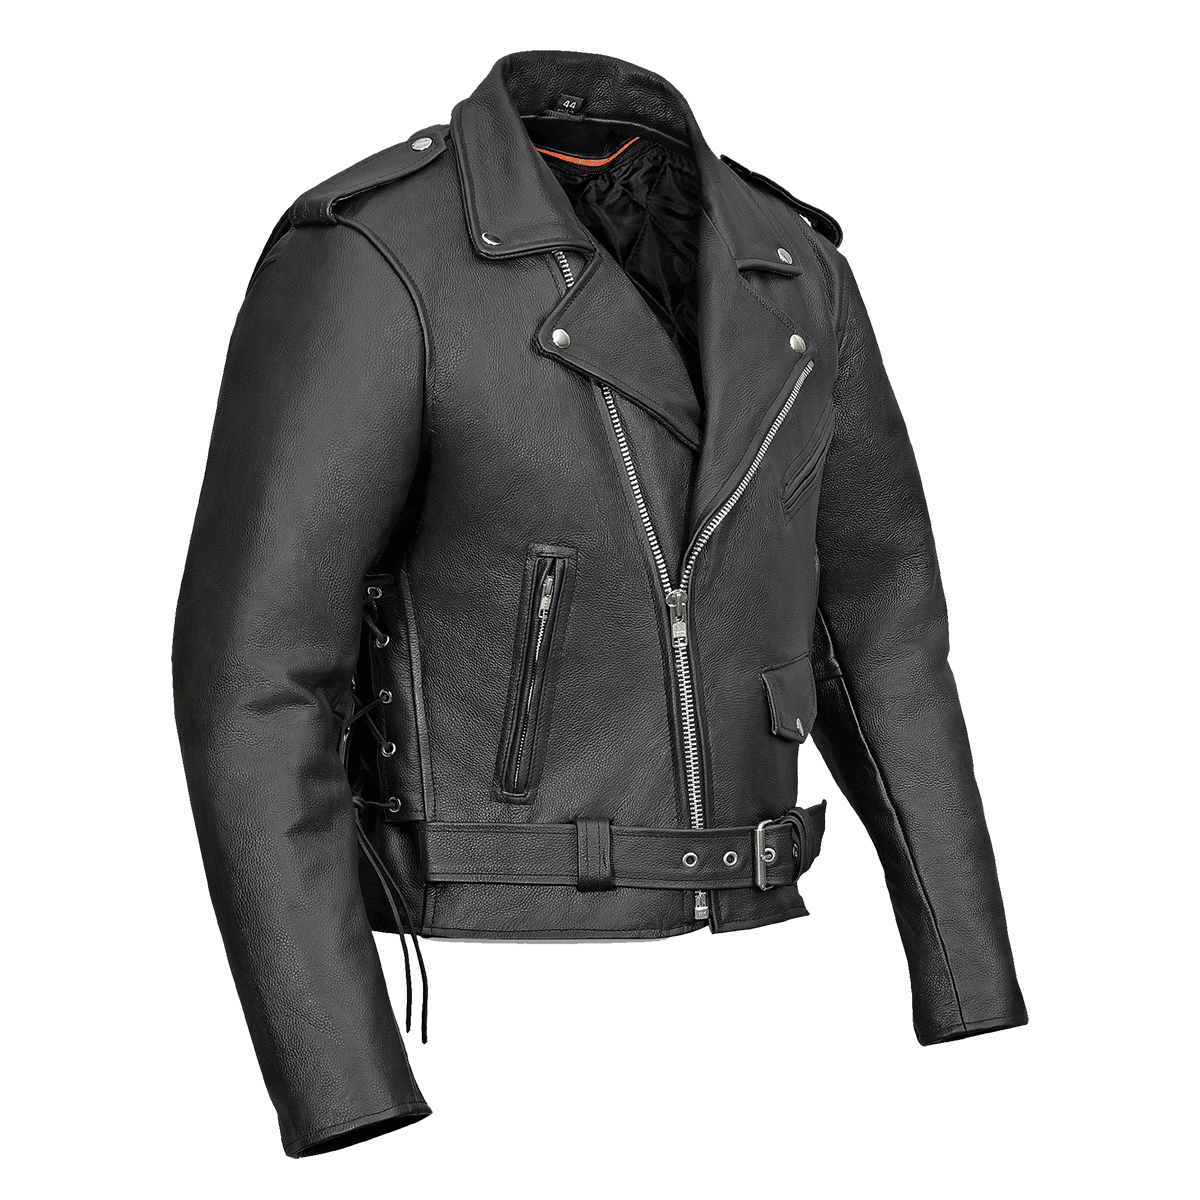 Vance Leather VL515S Men's Basic Classic Motorcycle Jacket W/Lace Sides and Zip Out Liner